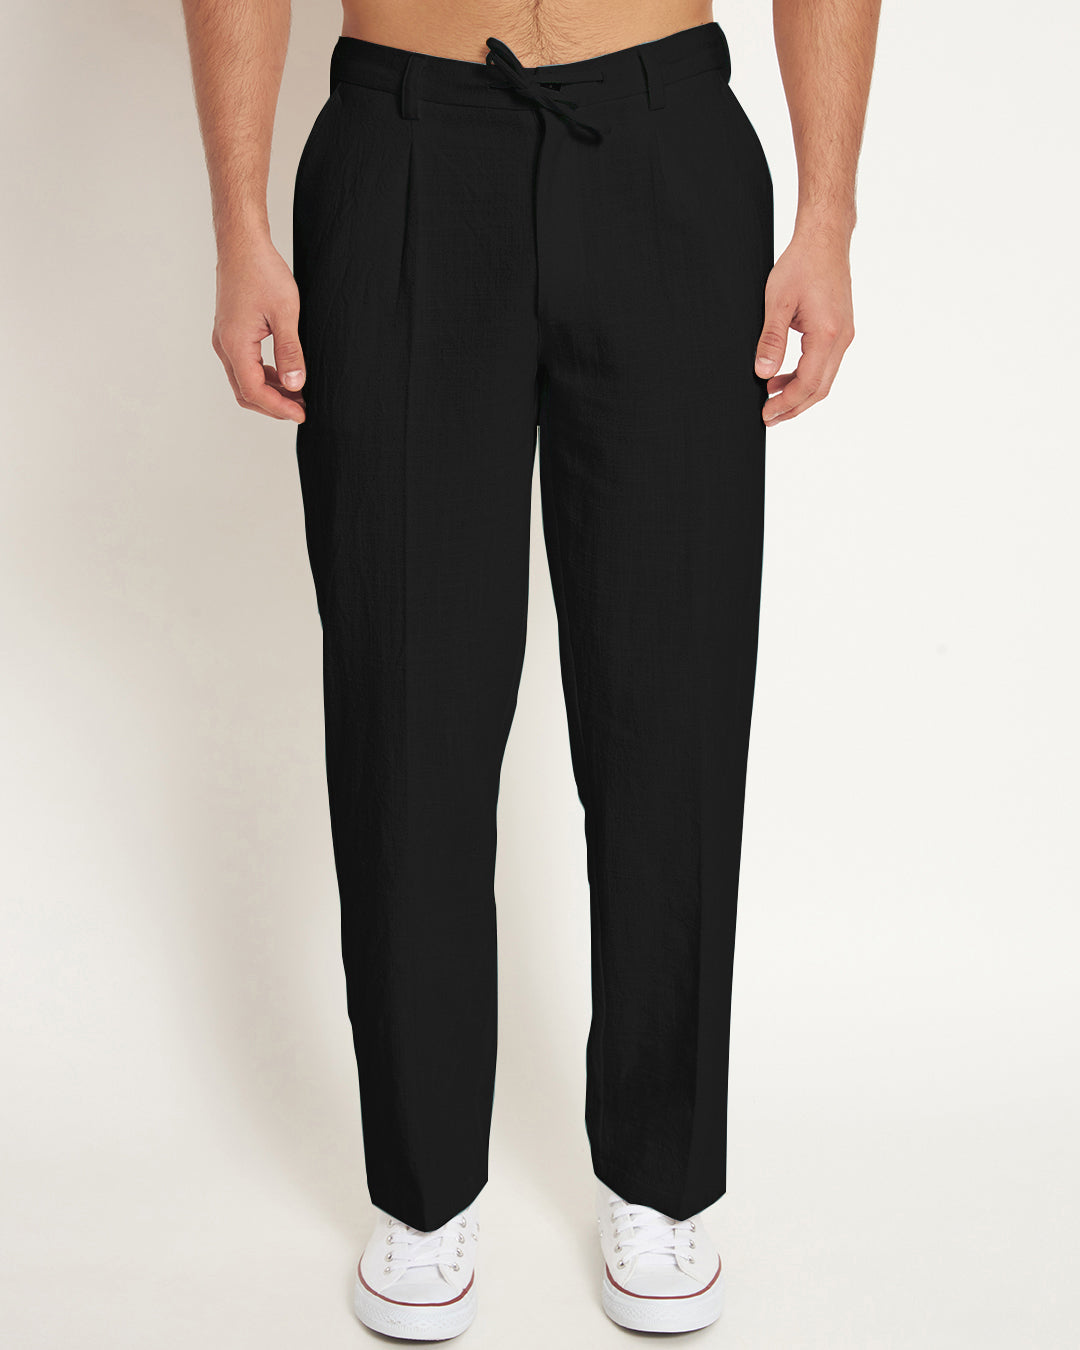 Attractive Men Trousers (combo) 2for boy